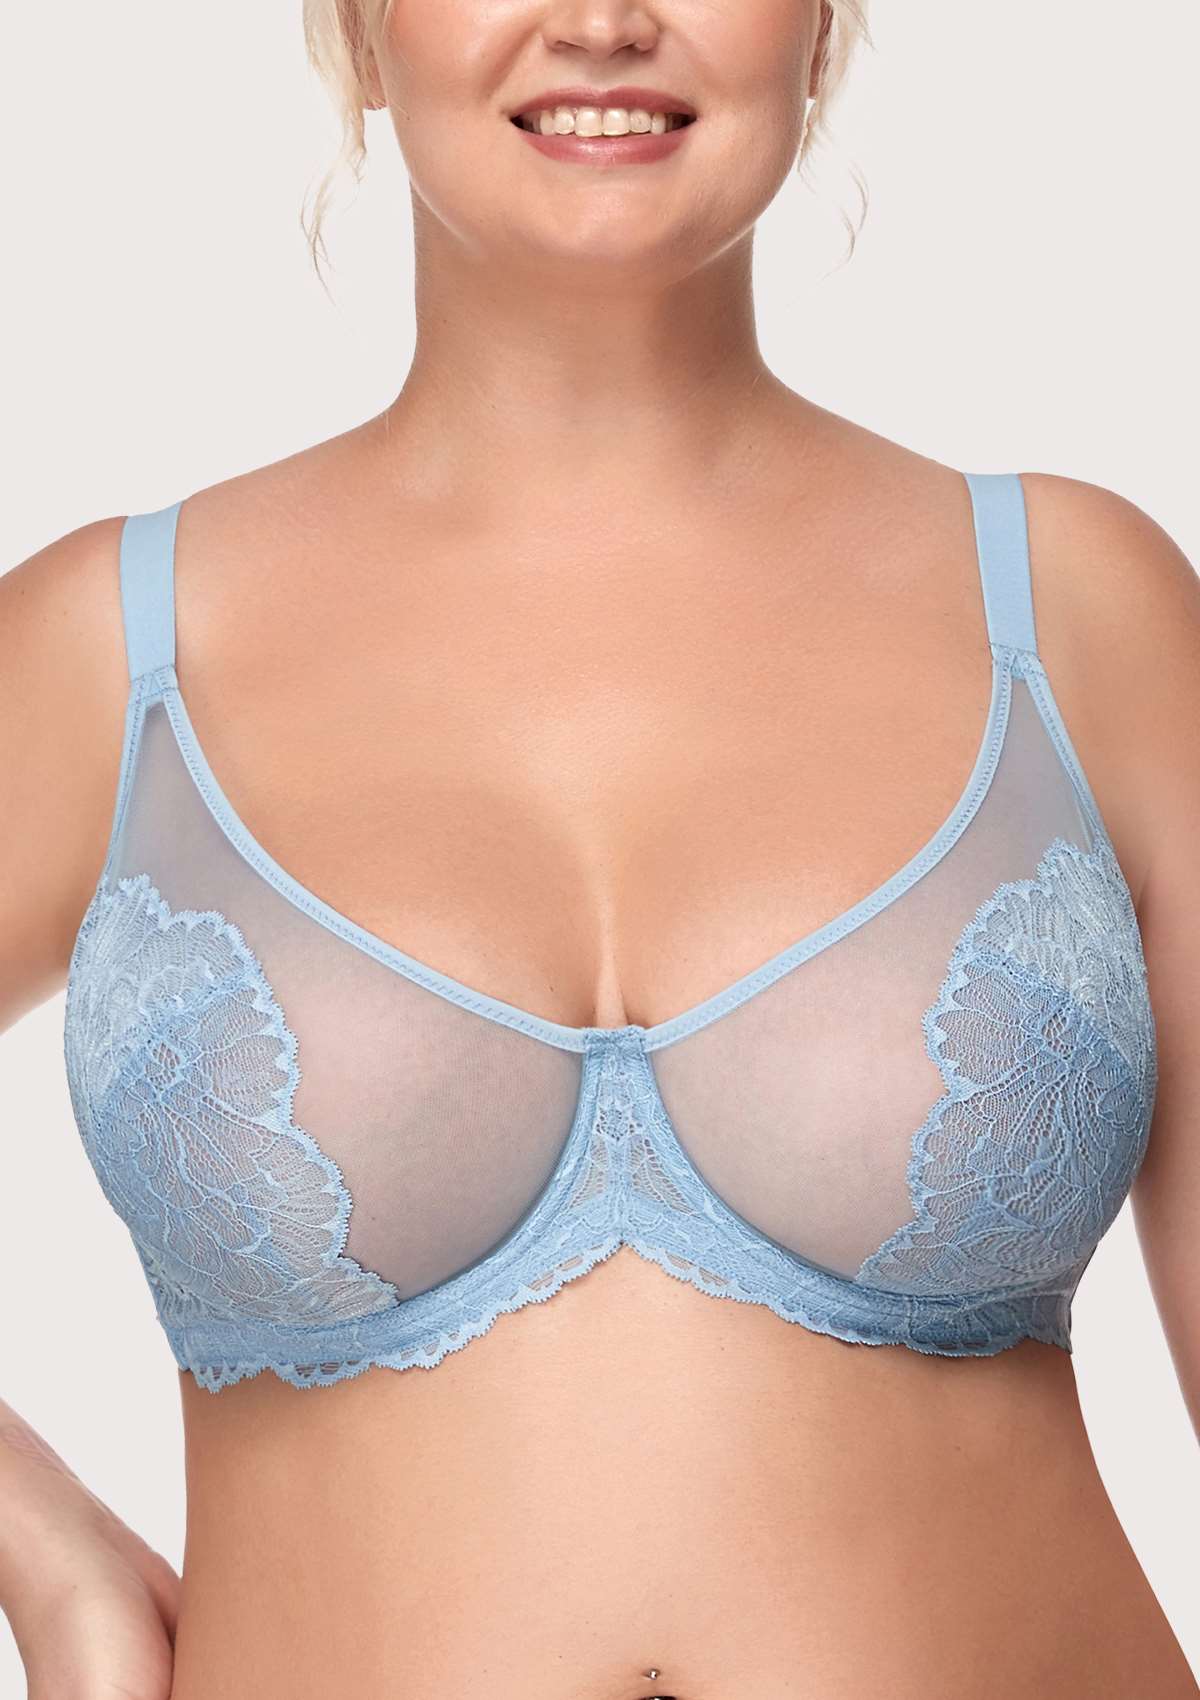 HSIA Blossom Full Coverage Supportive Unlined Underwire Bra Set - Storm Blue / 36 / C